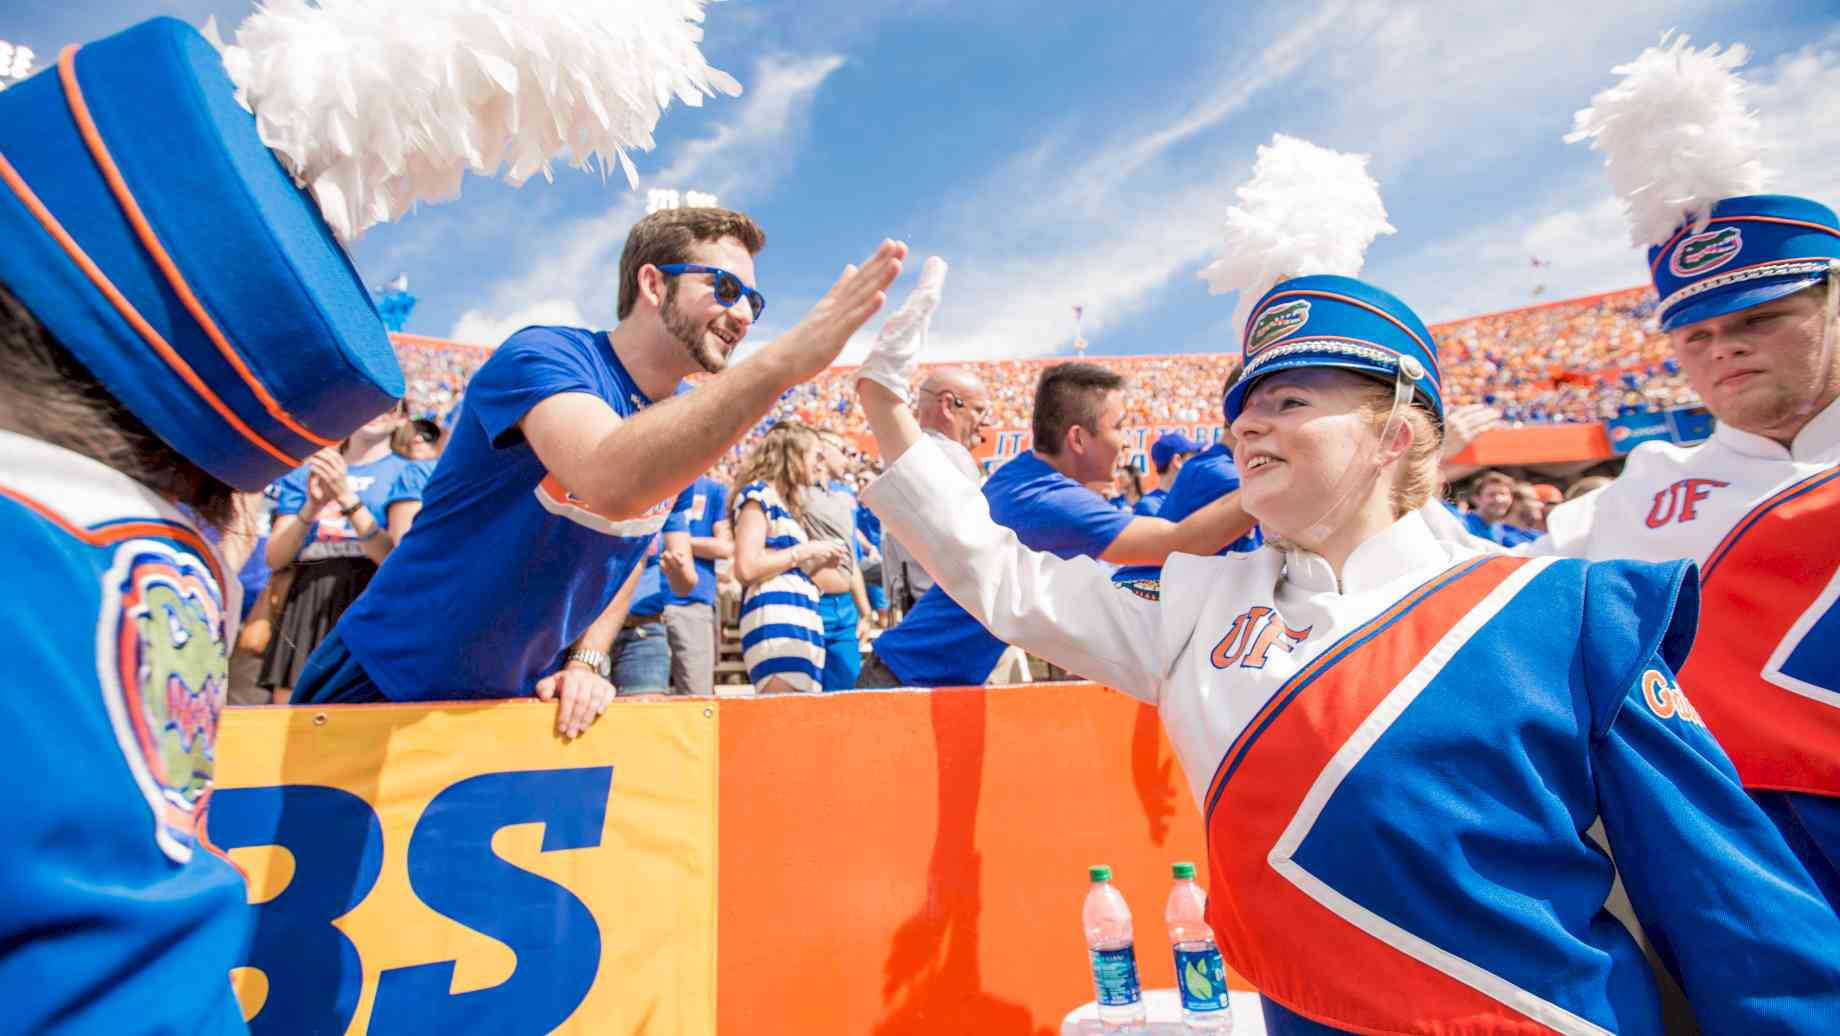 UF is home to the Pride of the Sunshine Gator Marching Band, one of the oldest and most prominent music ensembles on campus. [Alt text: Gator Band member in uniform high fives a student in the crowd at a football game as they run off the field following a pre-game performance.]